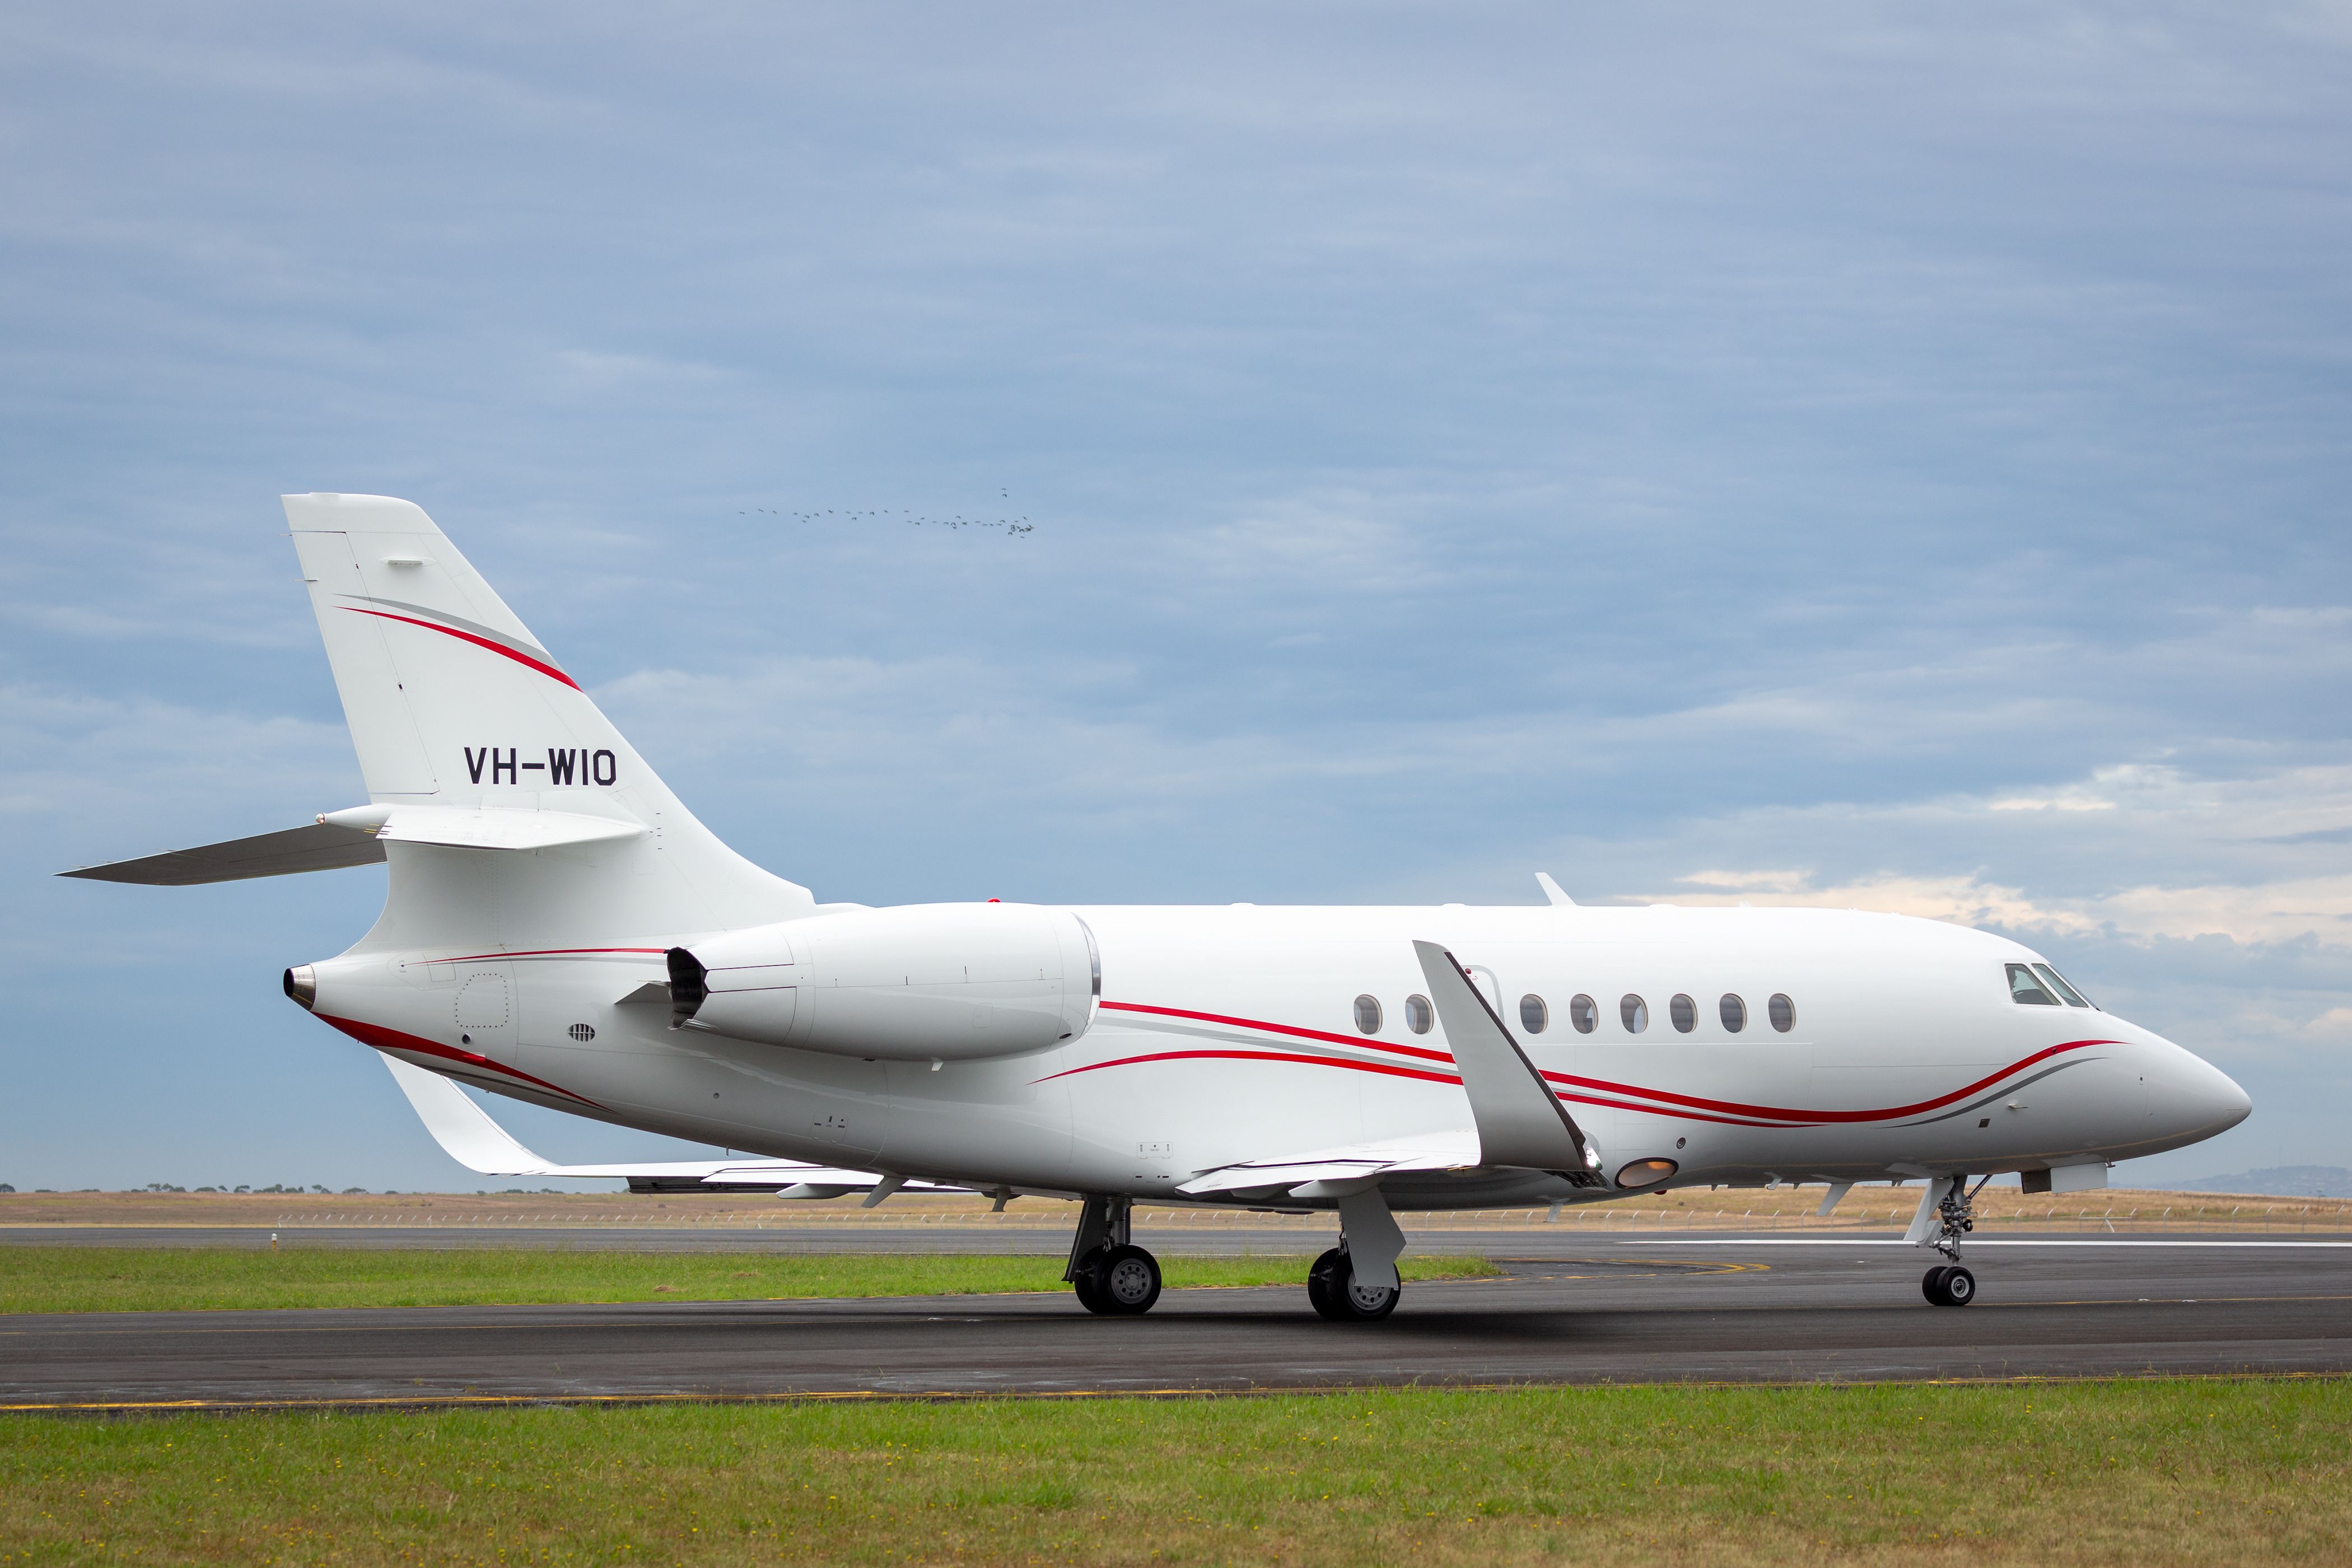 A Dassault Falcon 2000EX Business jet taxiing at Avalon Airport.